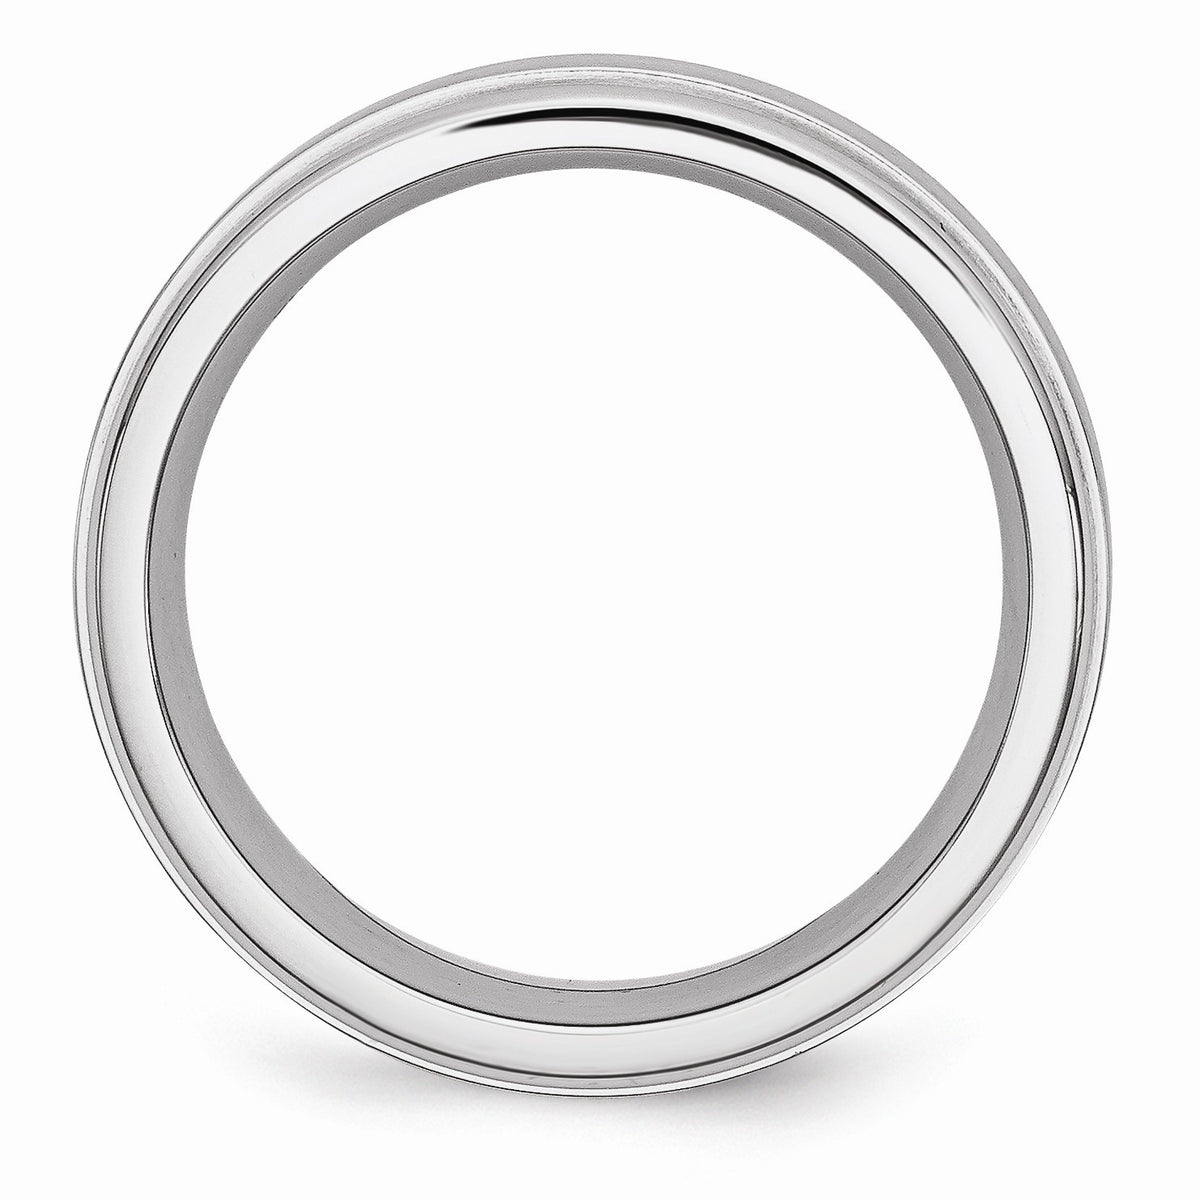 Alternate view of the 8mm Cobalt Satin Finish Ridged Edge Comfort Fit Band by The Black Bow Jewelry Co.